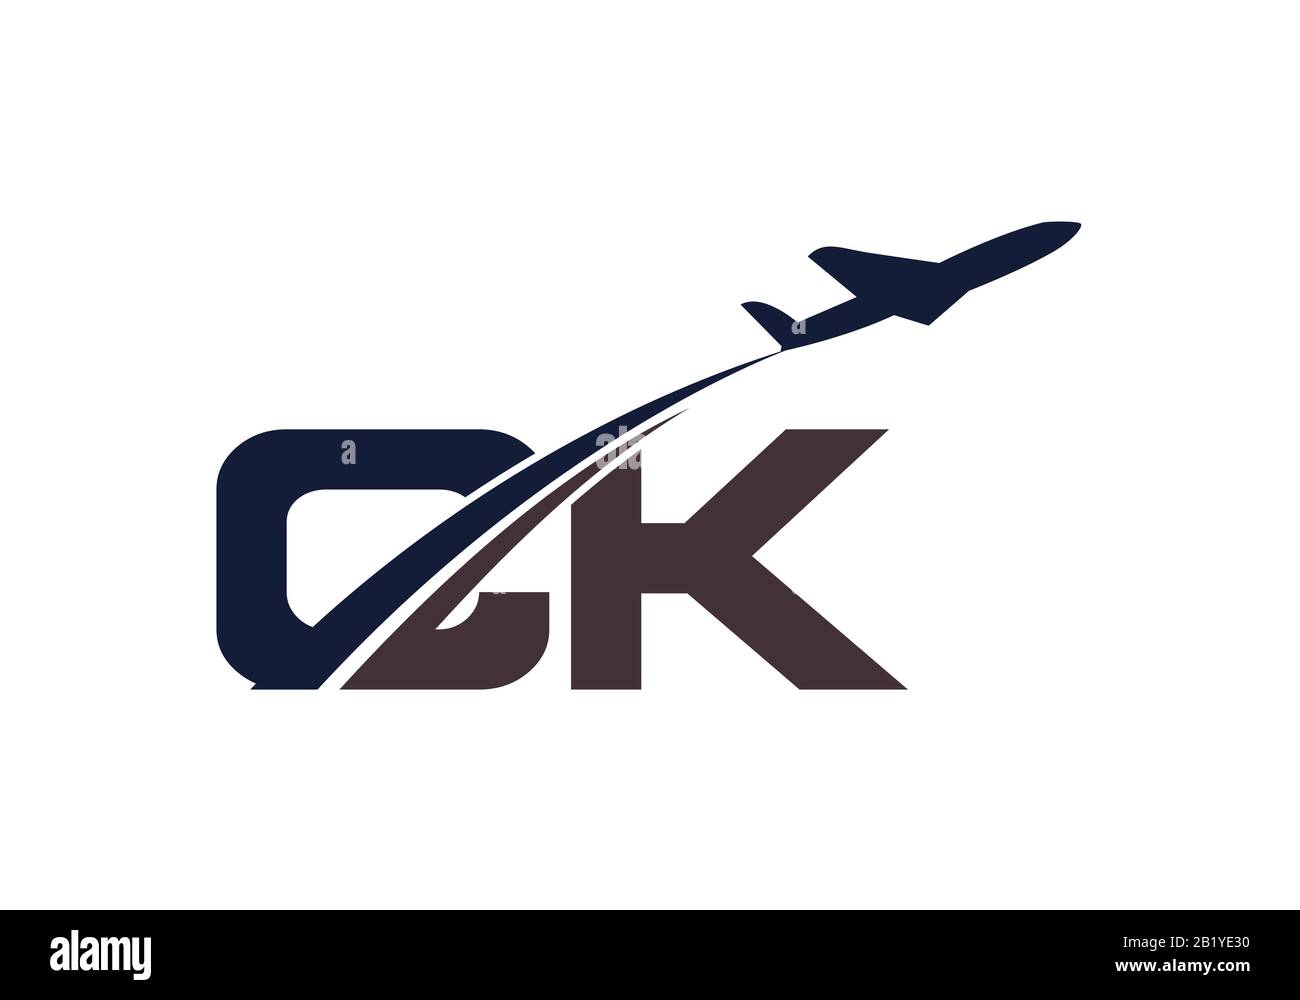 Initial Letter C and K  with Aviation Logo Design, Air, Airline, Airplane and Travel Logo template. Stock Vector